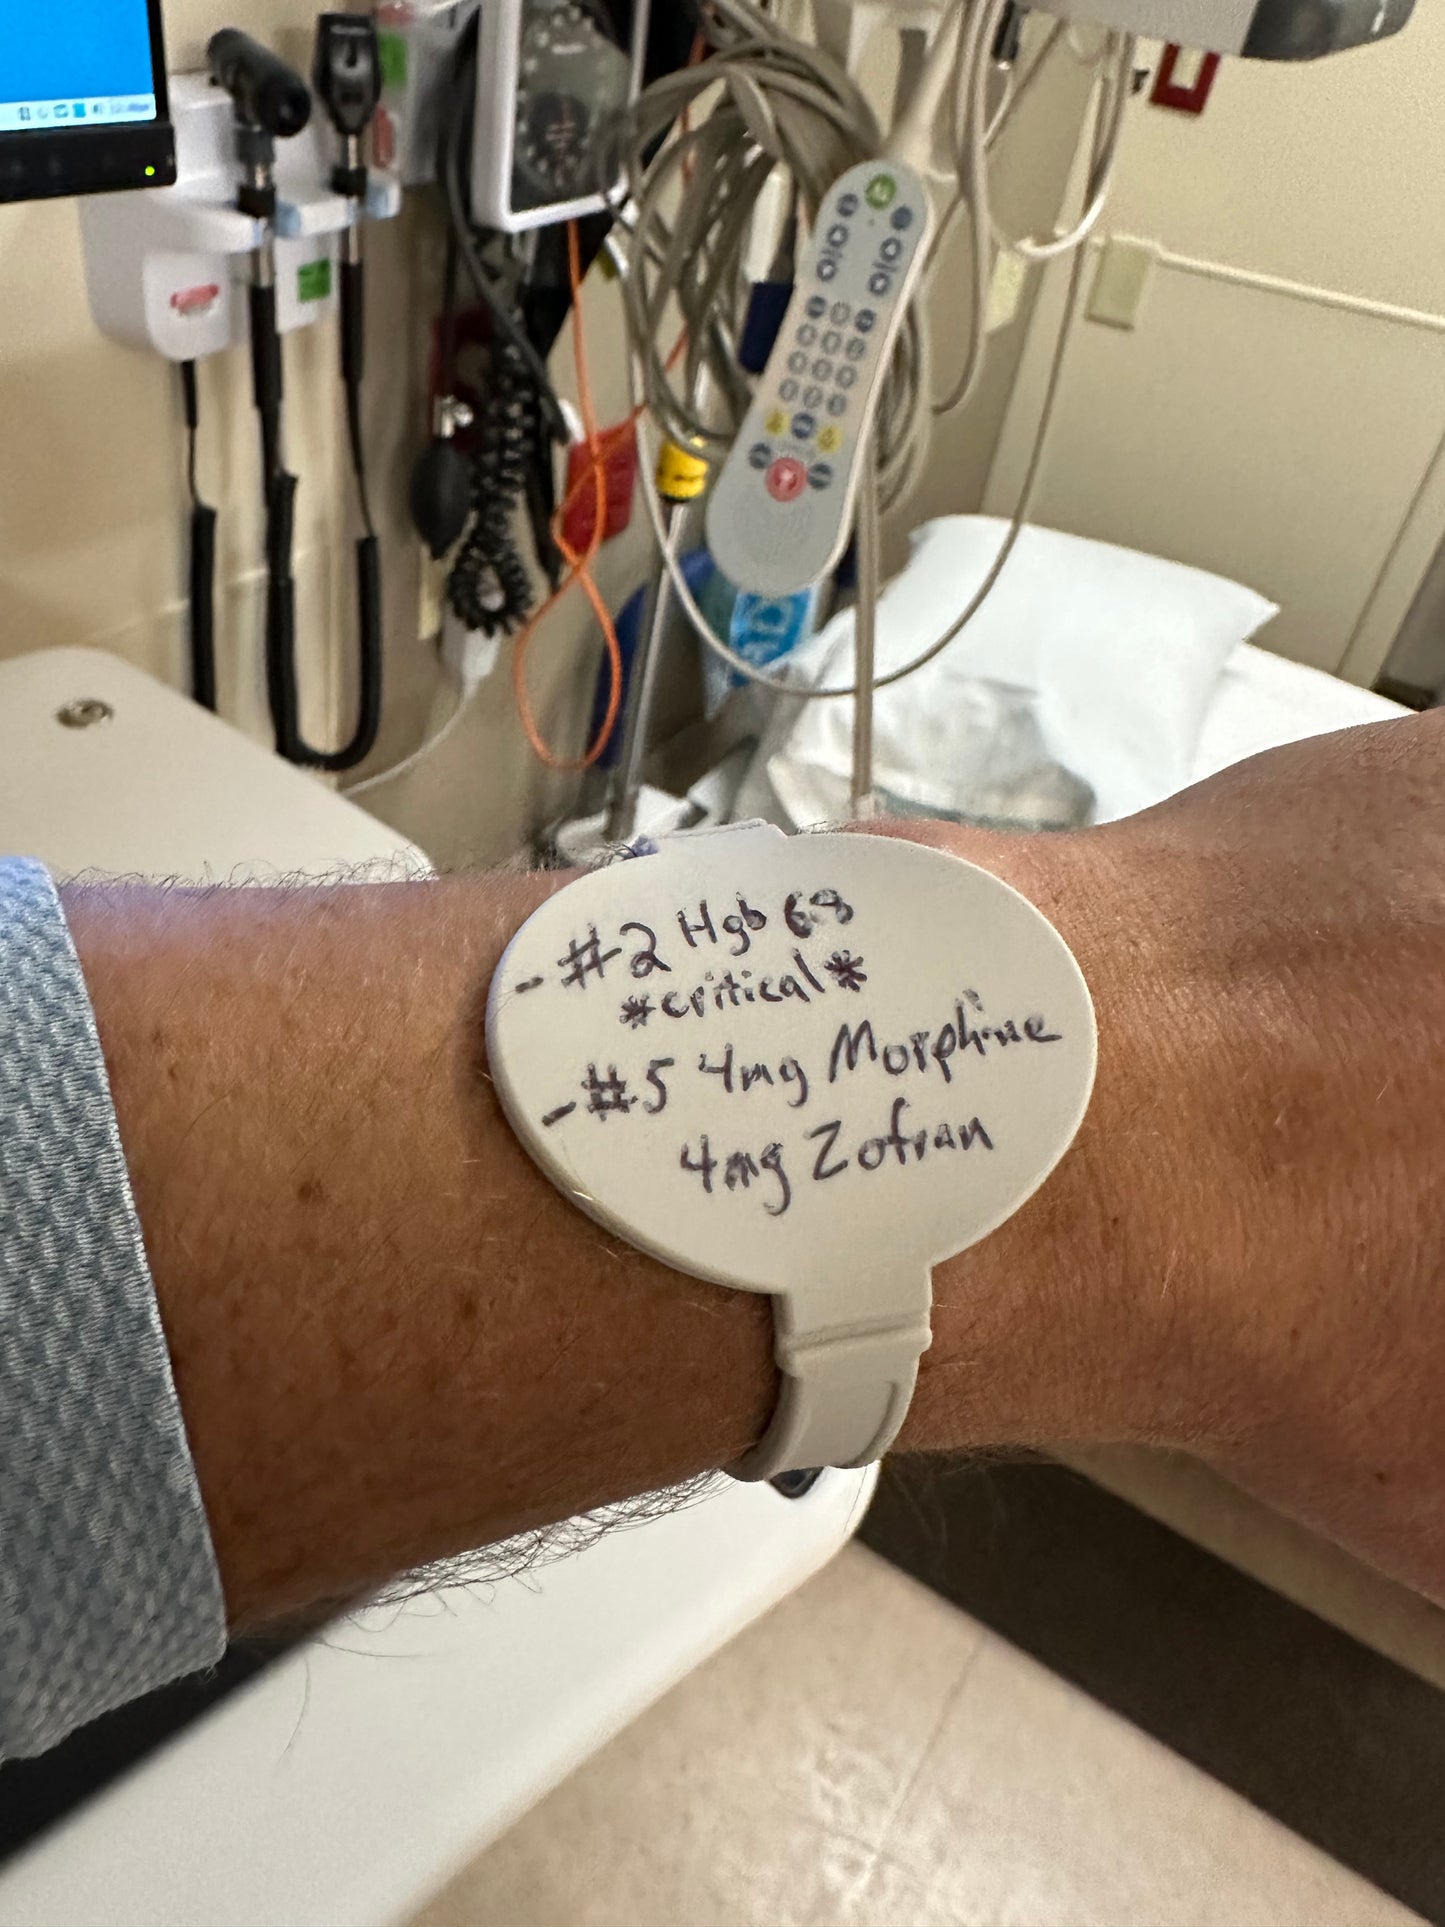 STATstrap The STAT-strap, a nurse's hack! The perfect nursing gift for graduation for the nurse or medical professional you love! This erasable wrist notepad for healthcare workers makes their busy shift just a little easier!